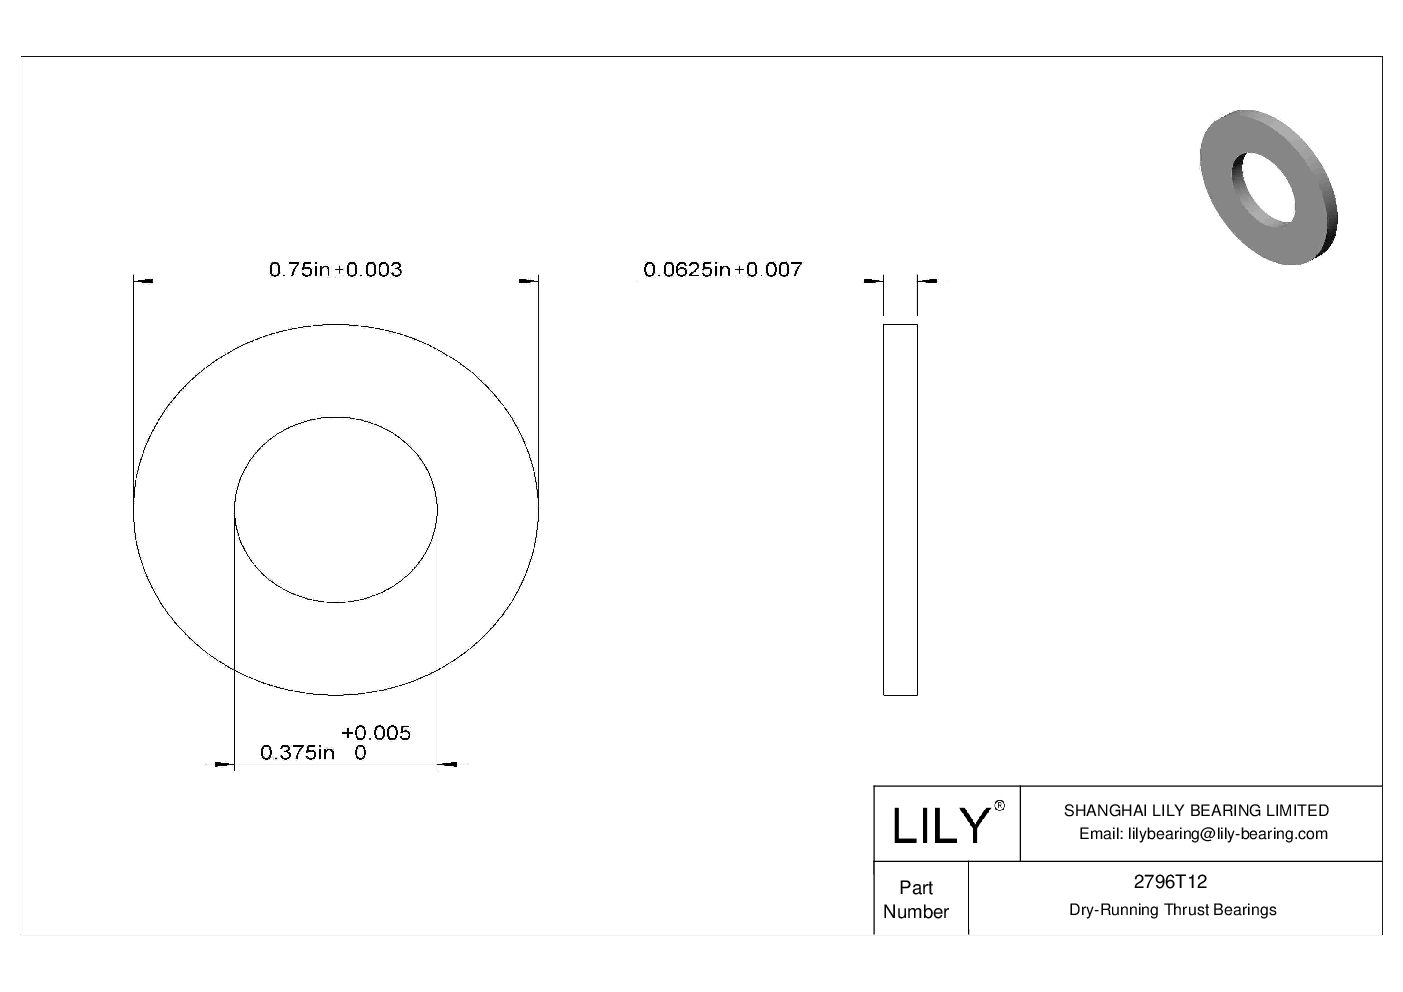 CHJGTBC Ultra-Low-Friction Dry-Running Thrust Bearings cad drawing